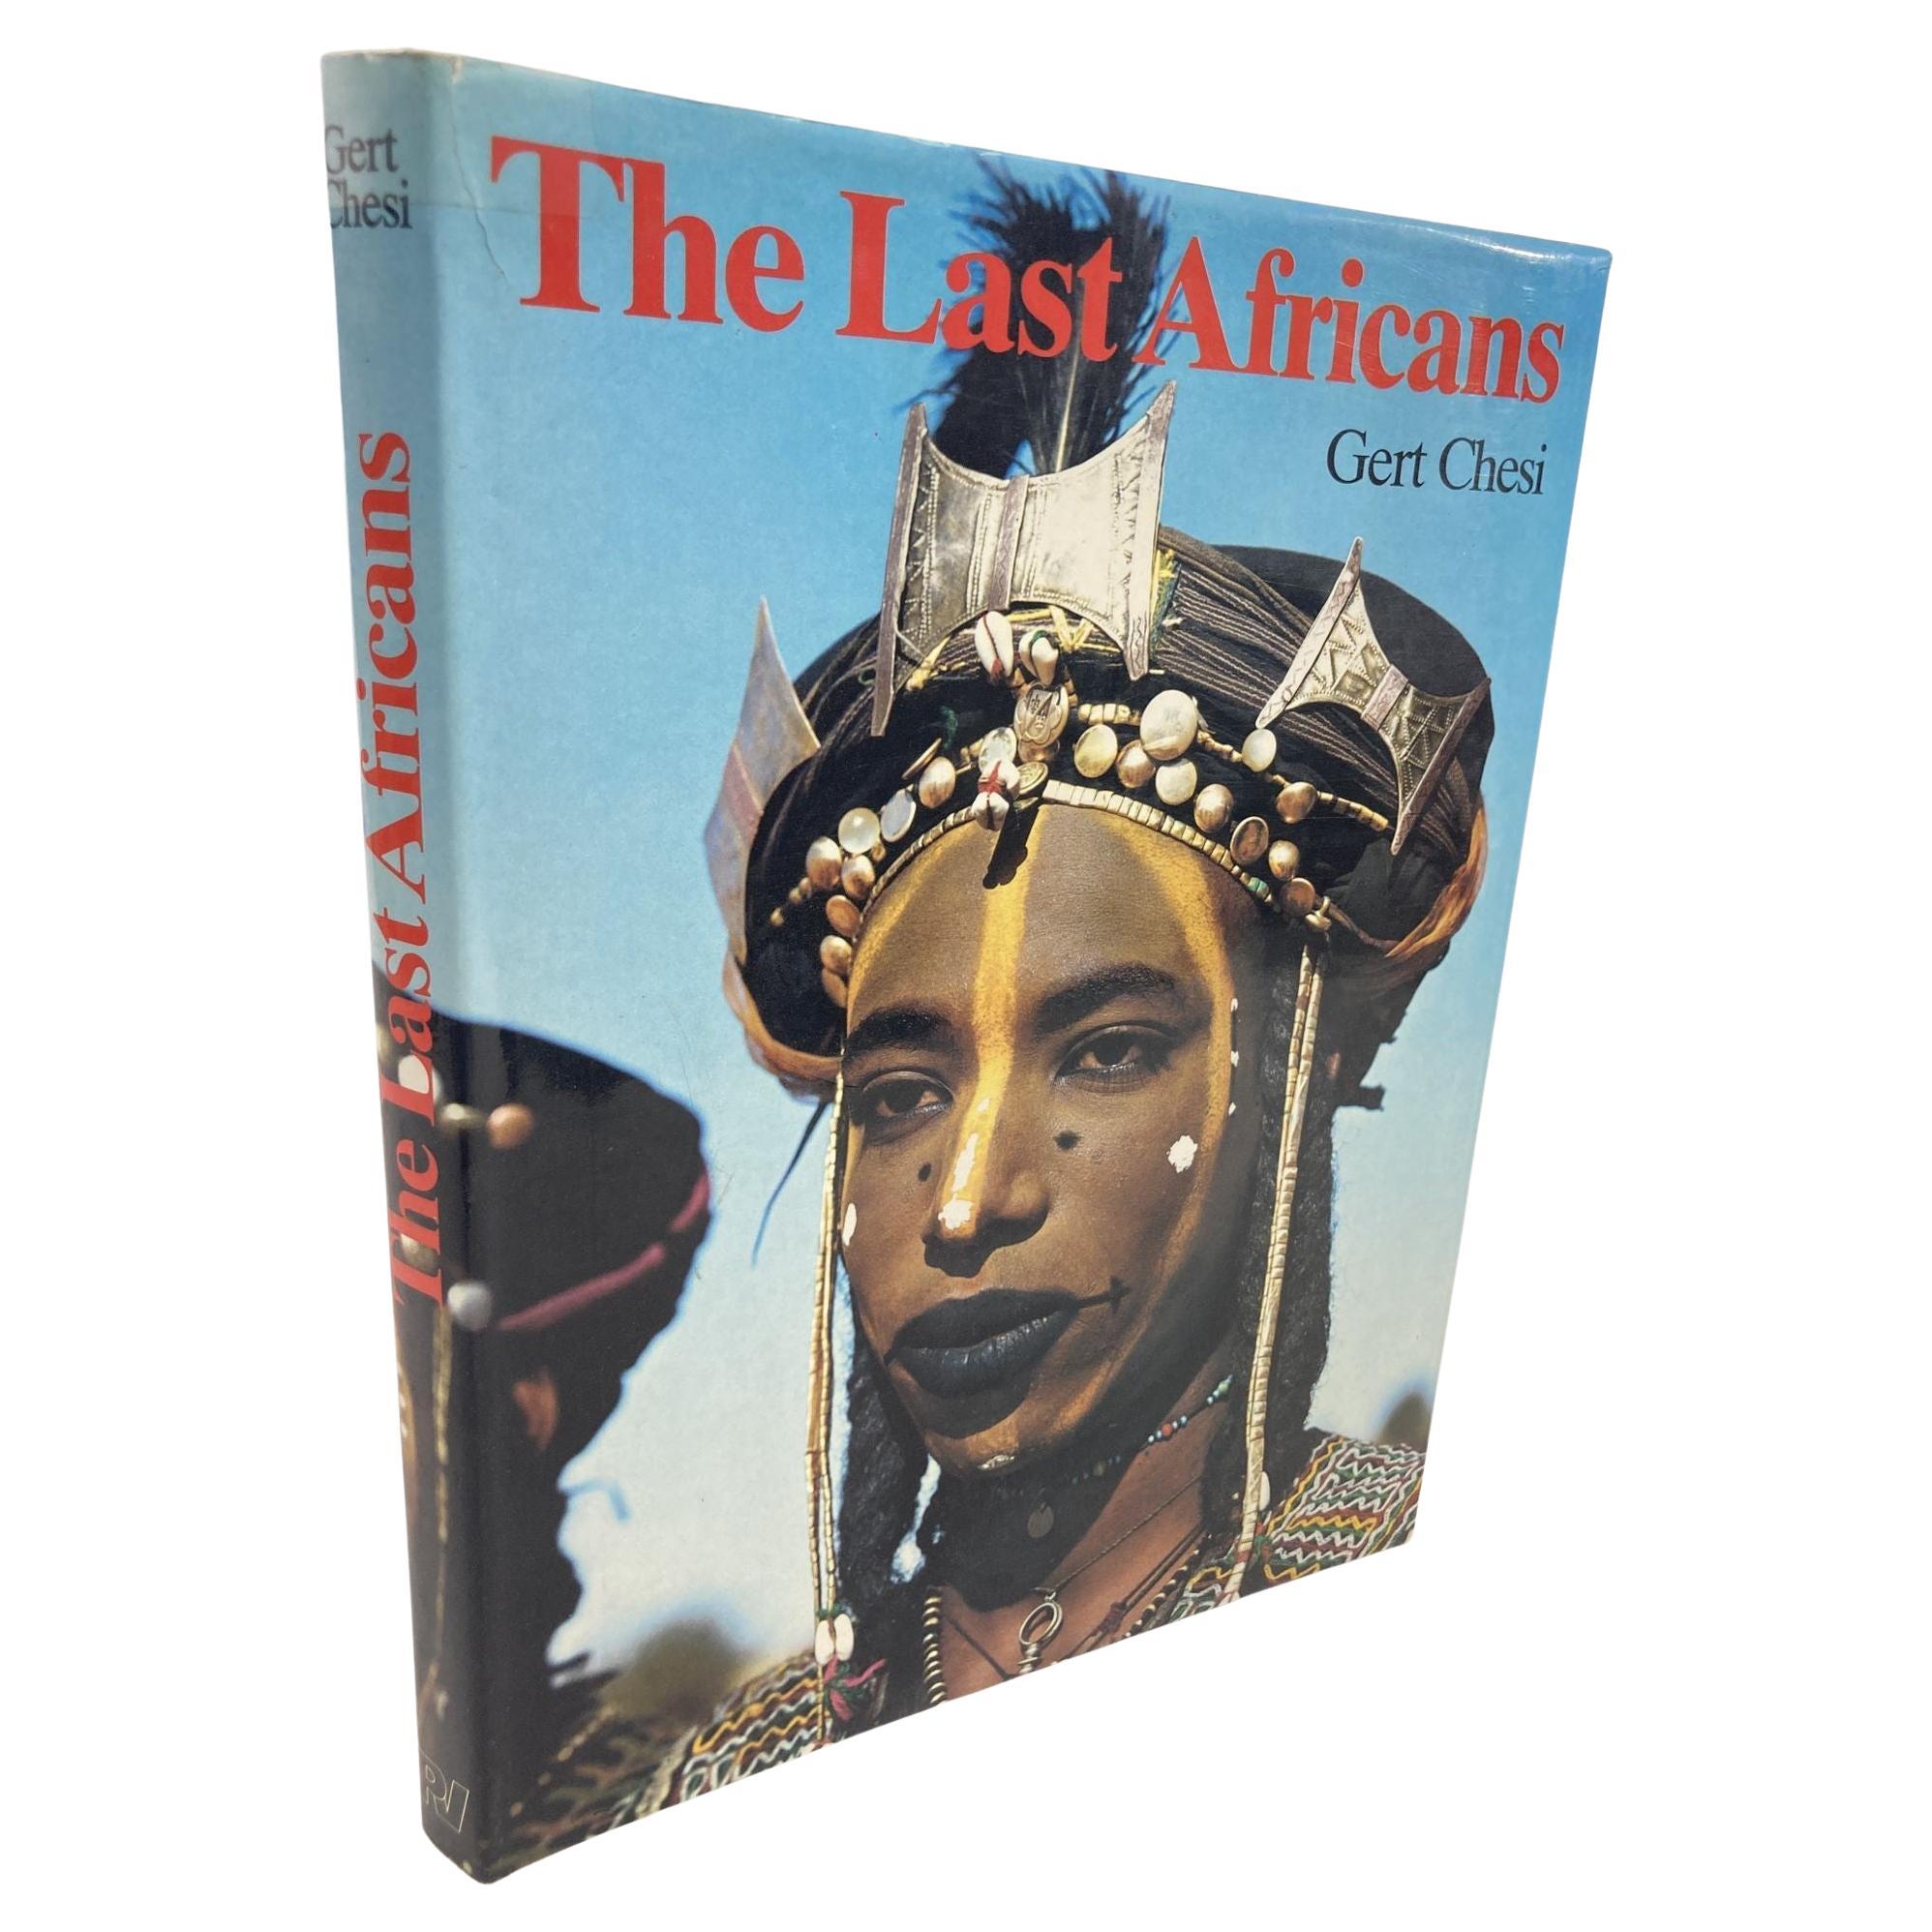 The Last Africans by Gert Chesi Hardcover Book 1981 For Sale